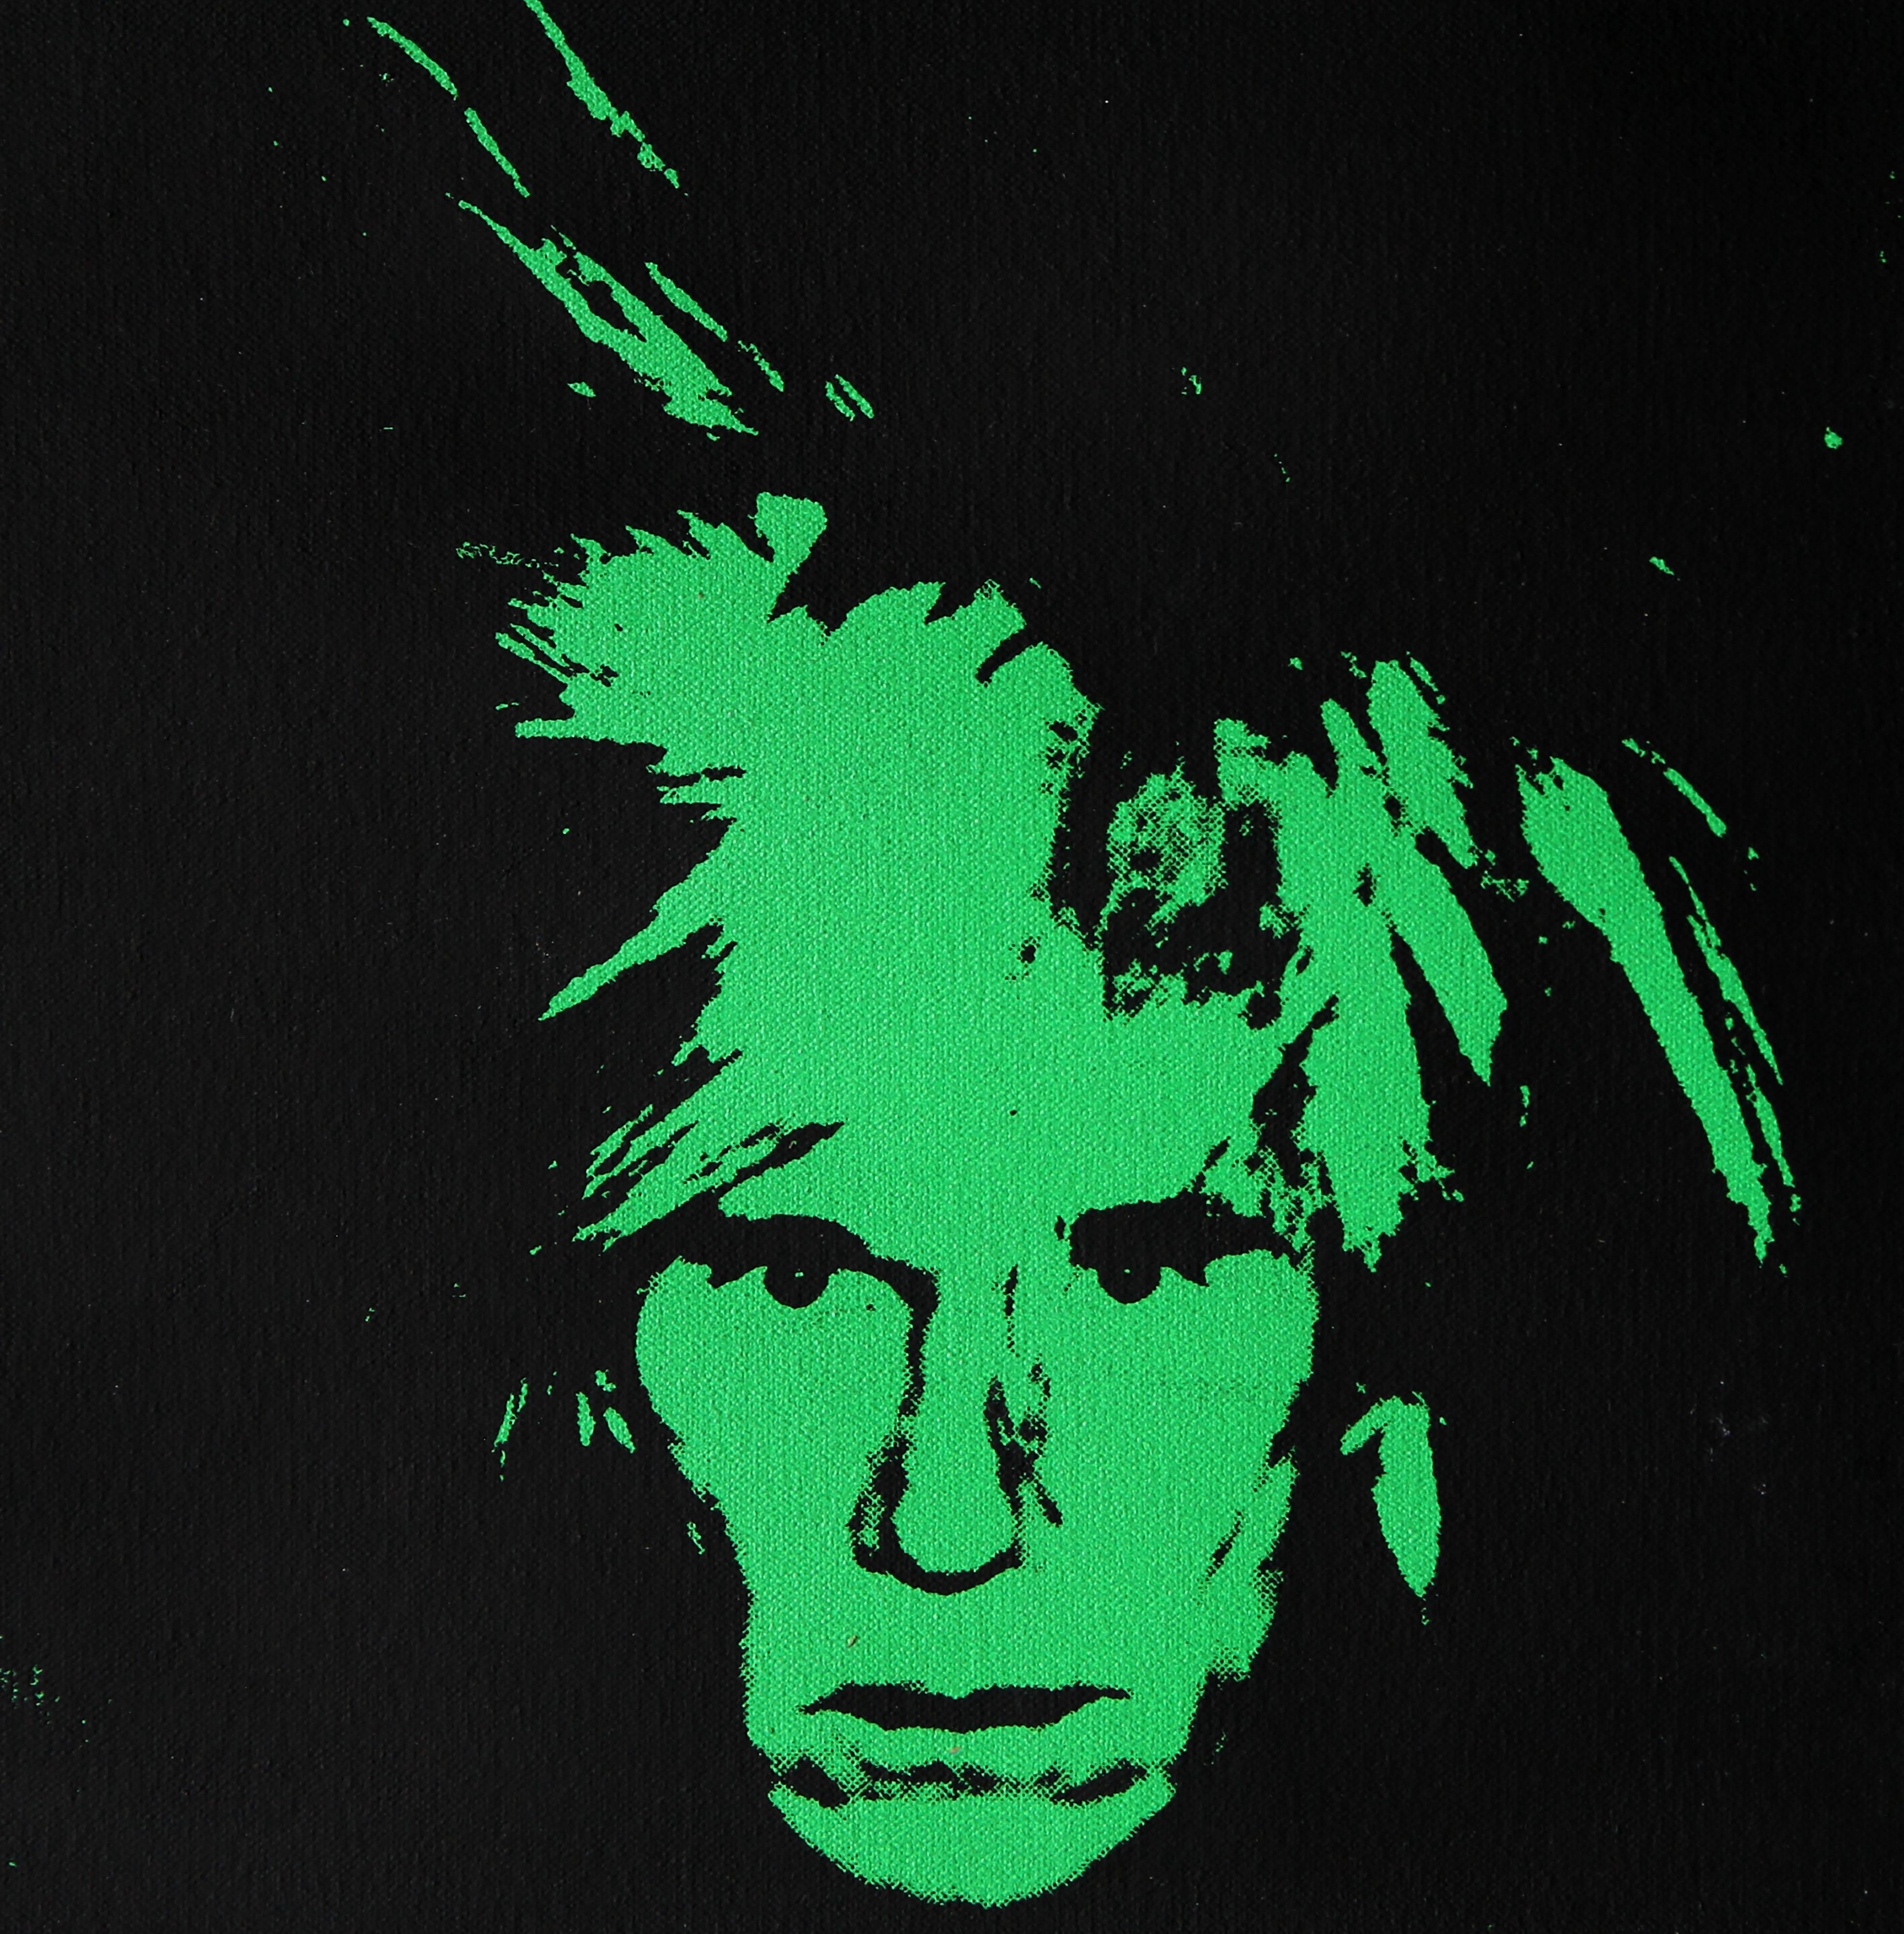 Denied Andy Warhol Fright Wig Self Portrait Green Painting by Charles Lutz